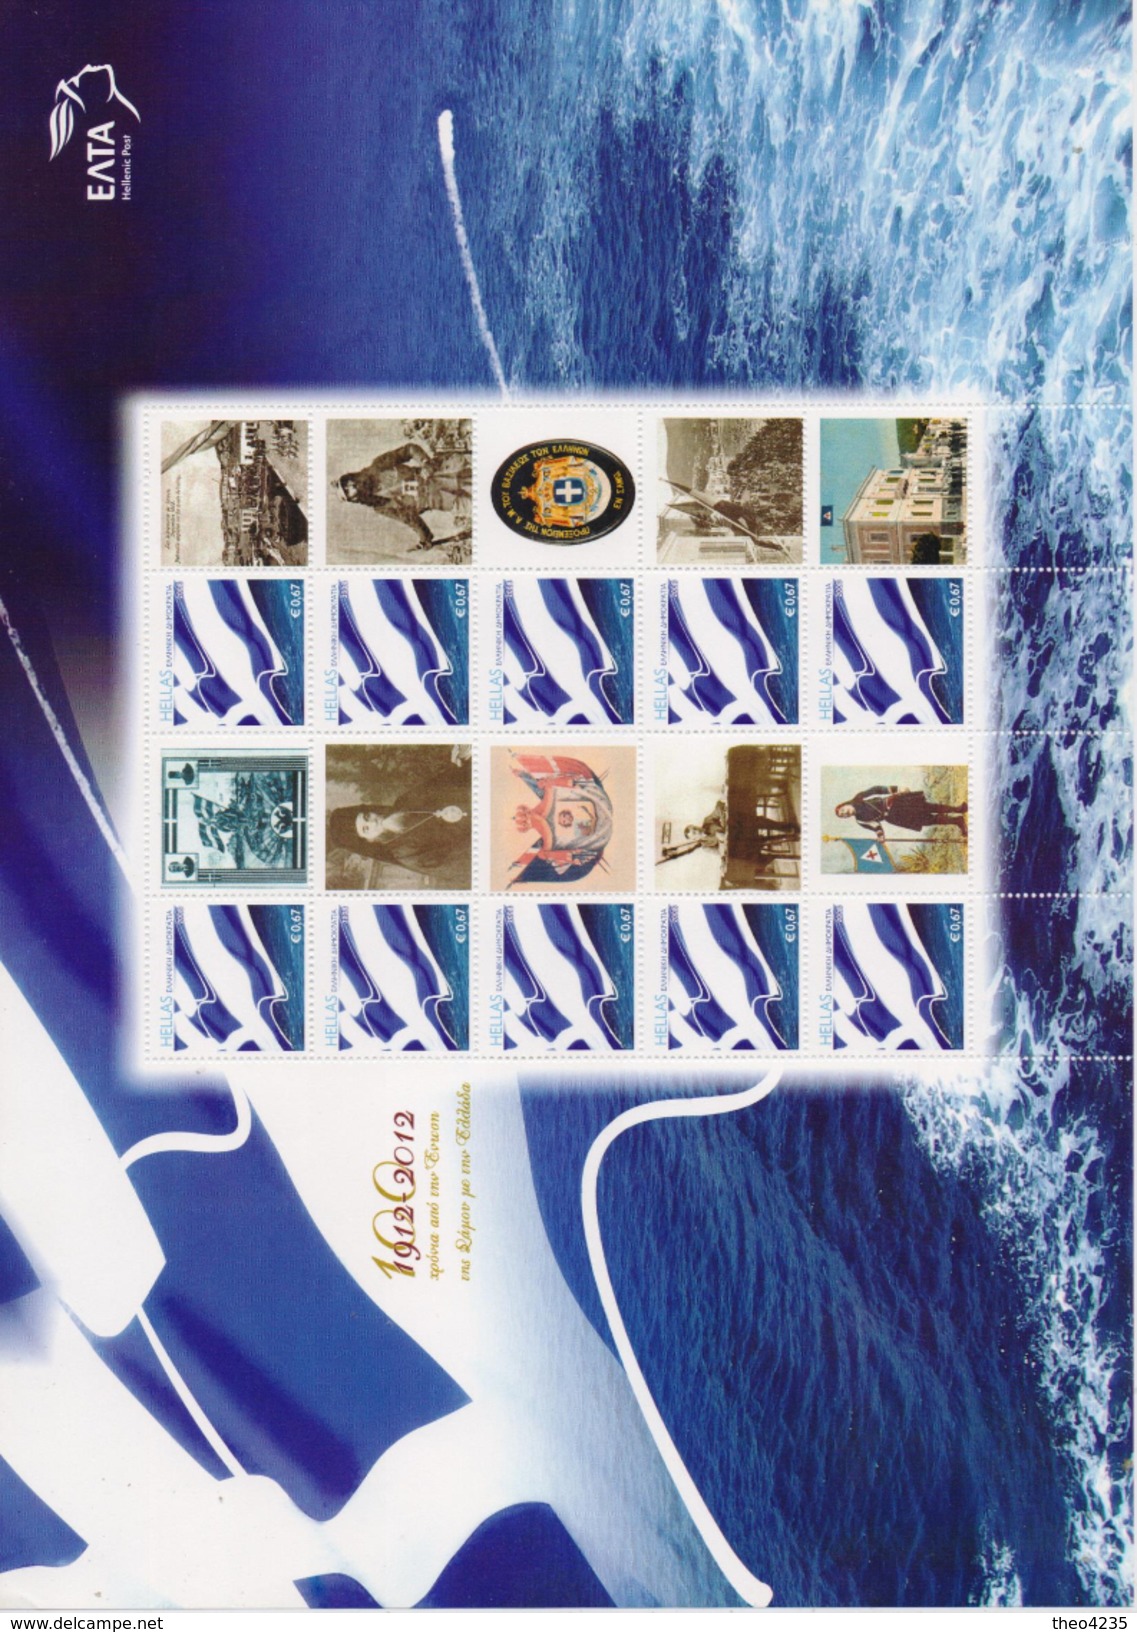 GREECE STAMPS PERSONAL STAMP WITH LABEL SHEETLET/100  YEARS UNION  OF SAMOS  ISLAND WITH GREECE  -2012-MNH - Ungebraucht